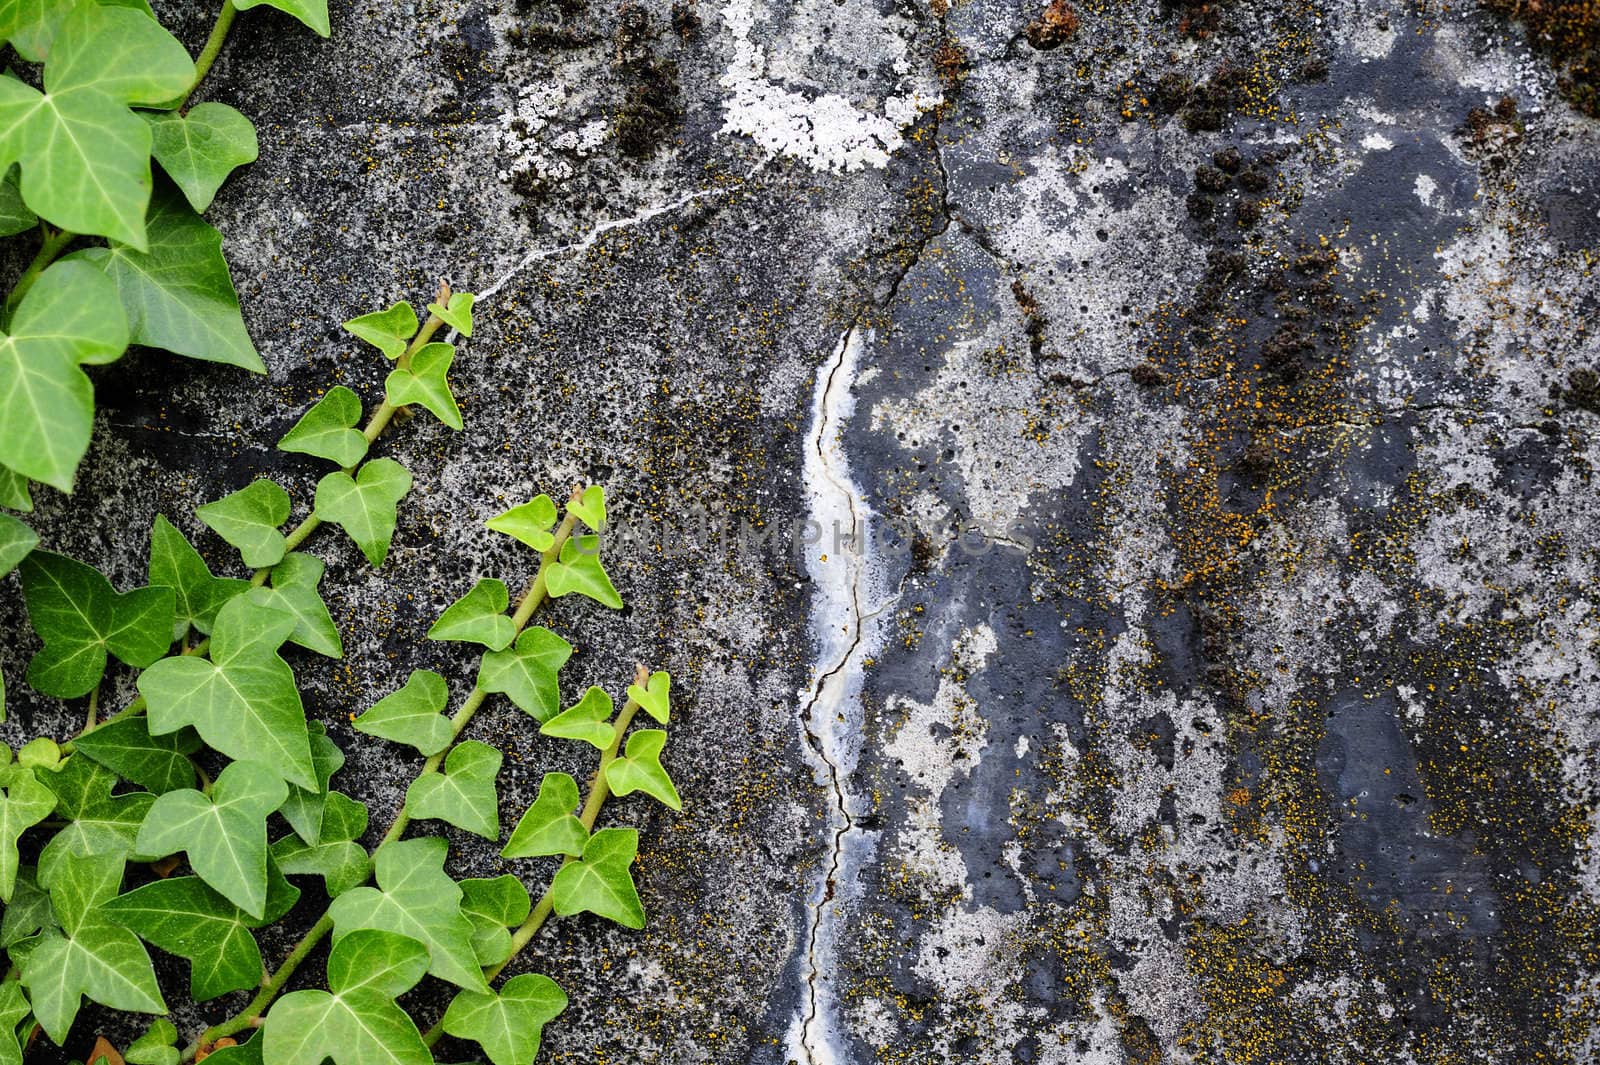 Tendrils of fres green ivy growing across a stained and textured concrete wall. Space for text on the concrete